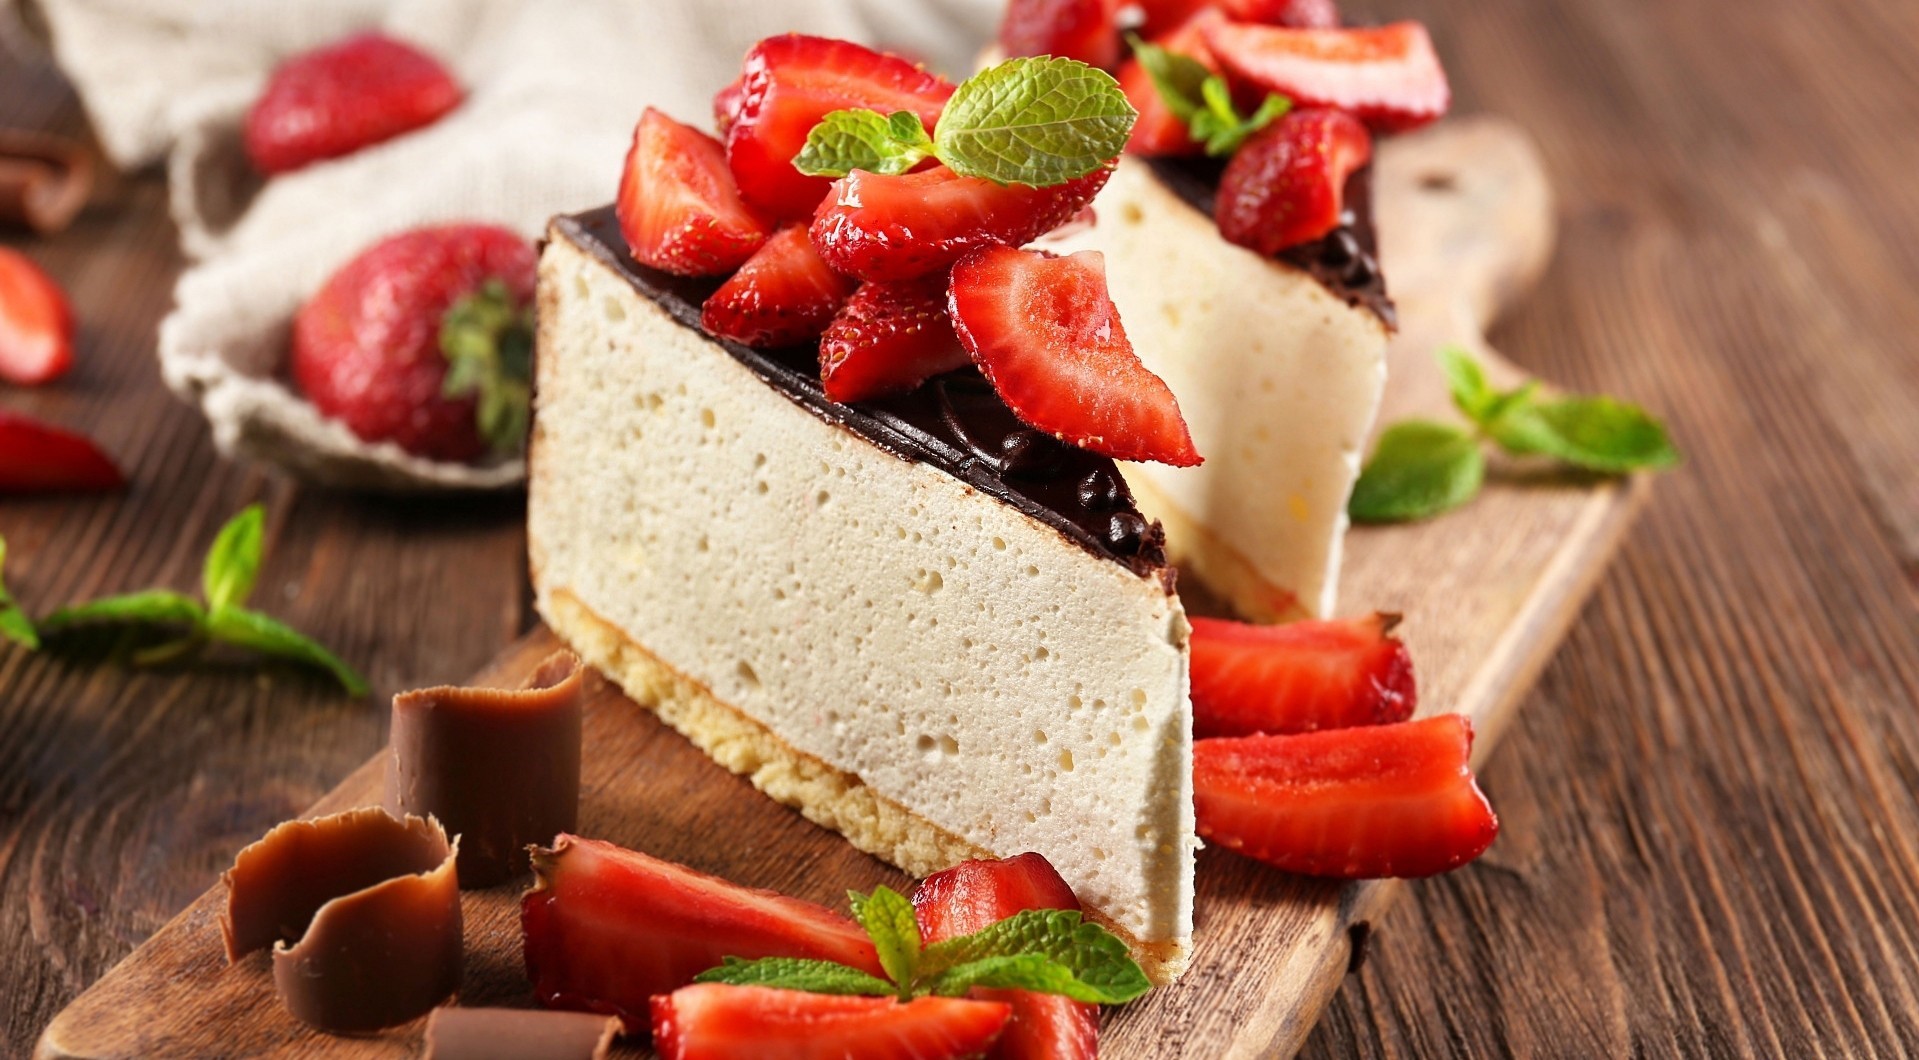 Strawberries Cheesecake Fruit Sweets Food Cake Mint Leaves Cutting Board Wooden Surface Chocolate 1919x1060